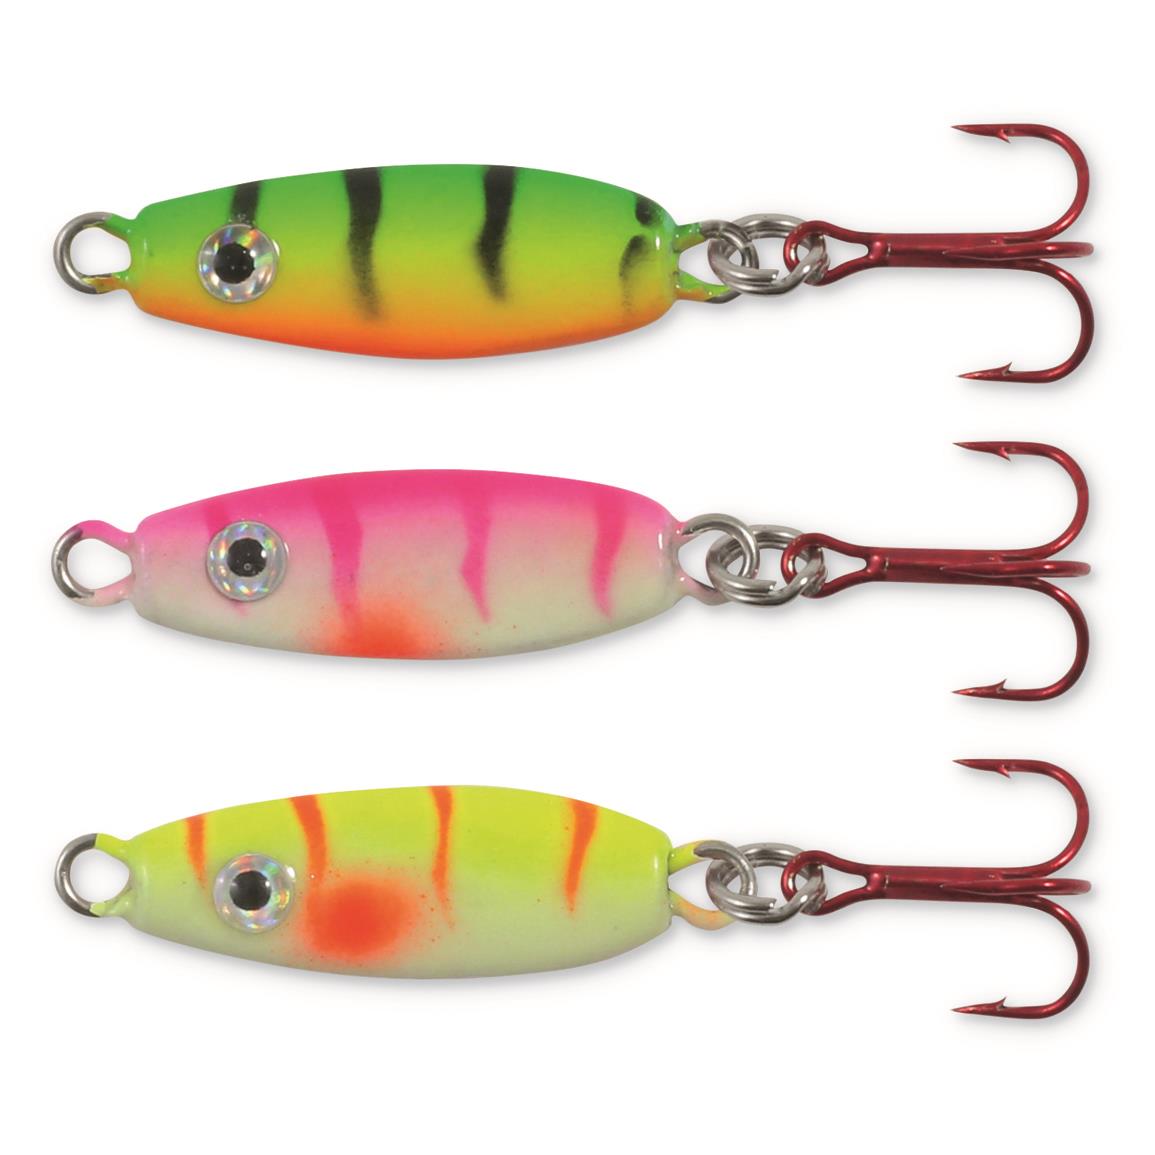 Northland Forage Minnow Spoons, 3 Pack, Assorted